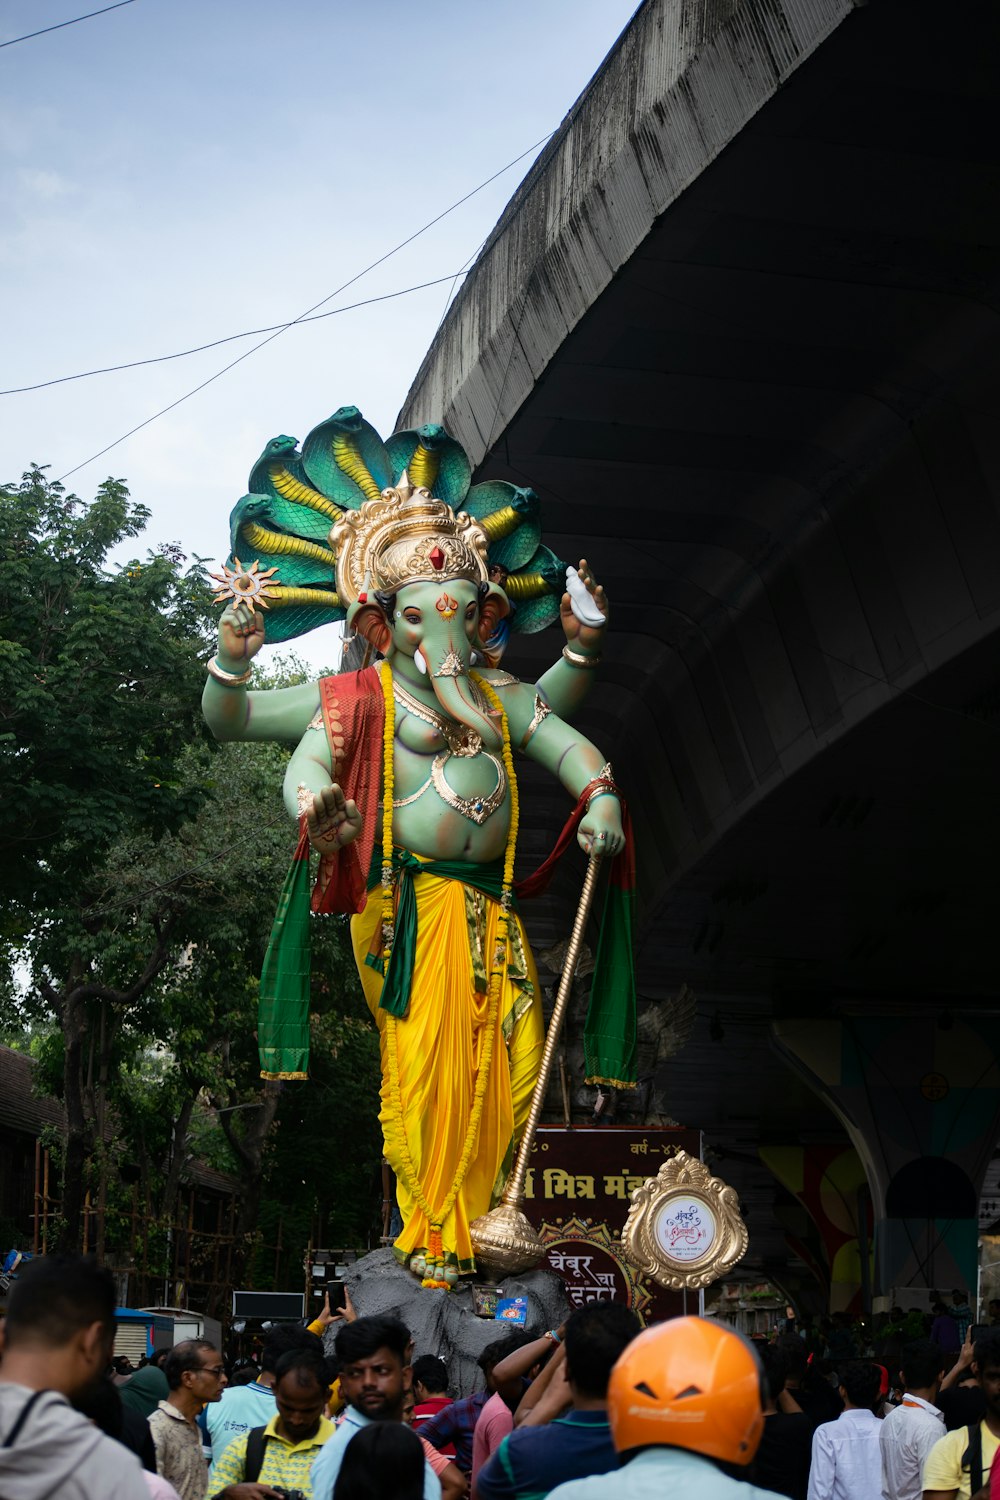 a large statue of a hindu god in the middle of a crowd